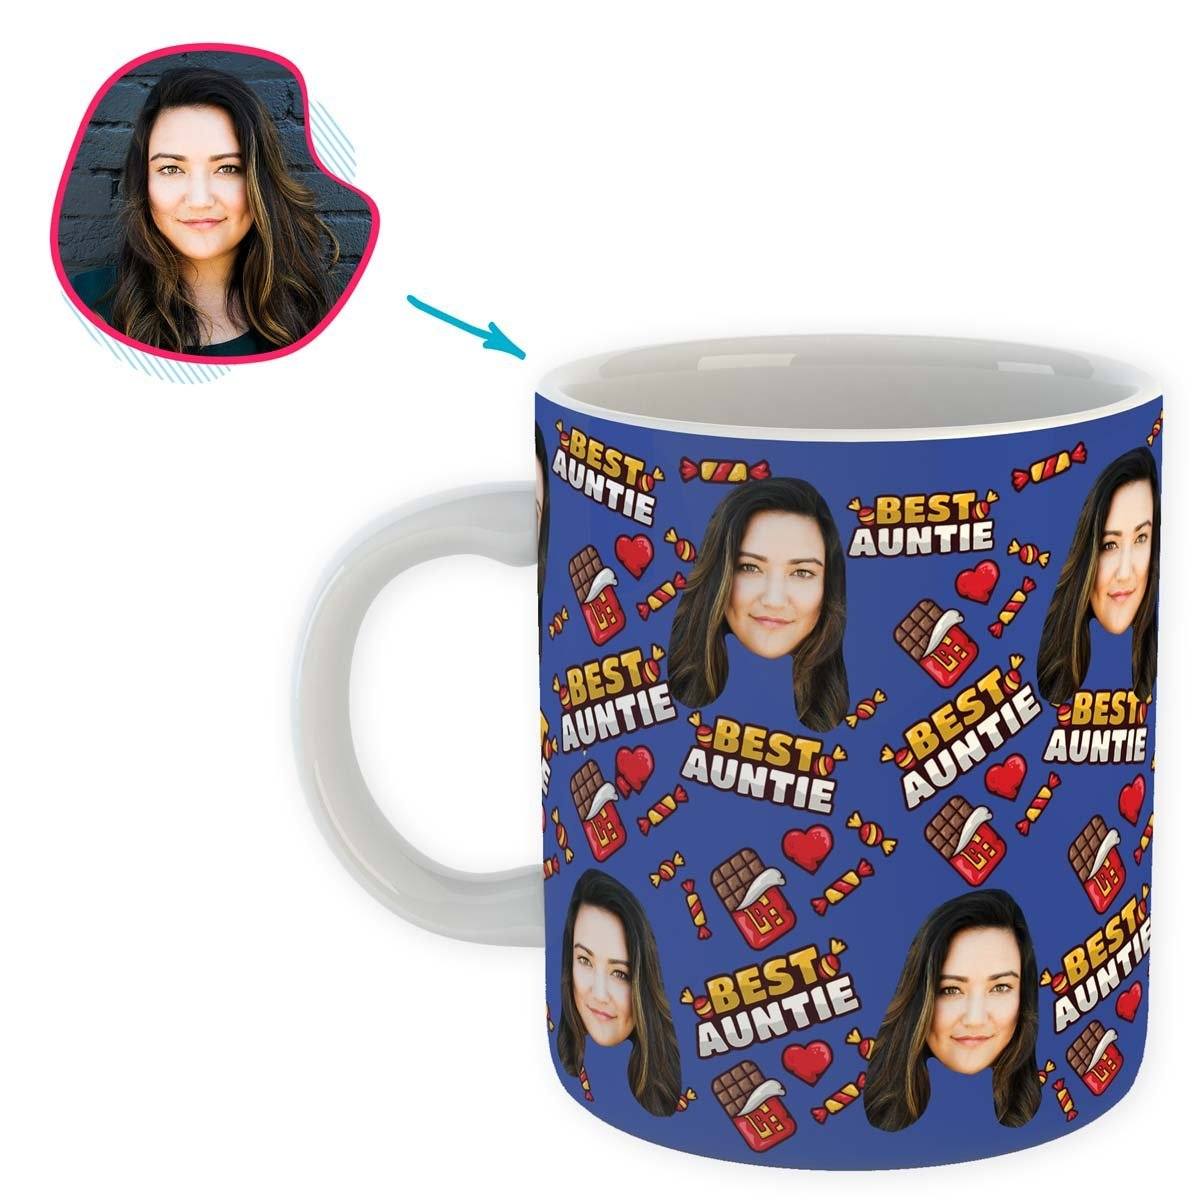 Darkblue Auntie personalized mug with photo of face printed on it